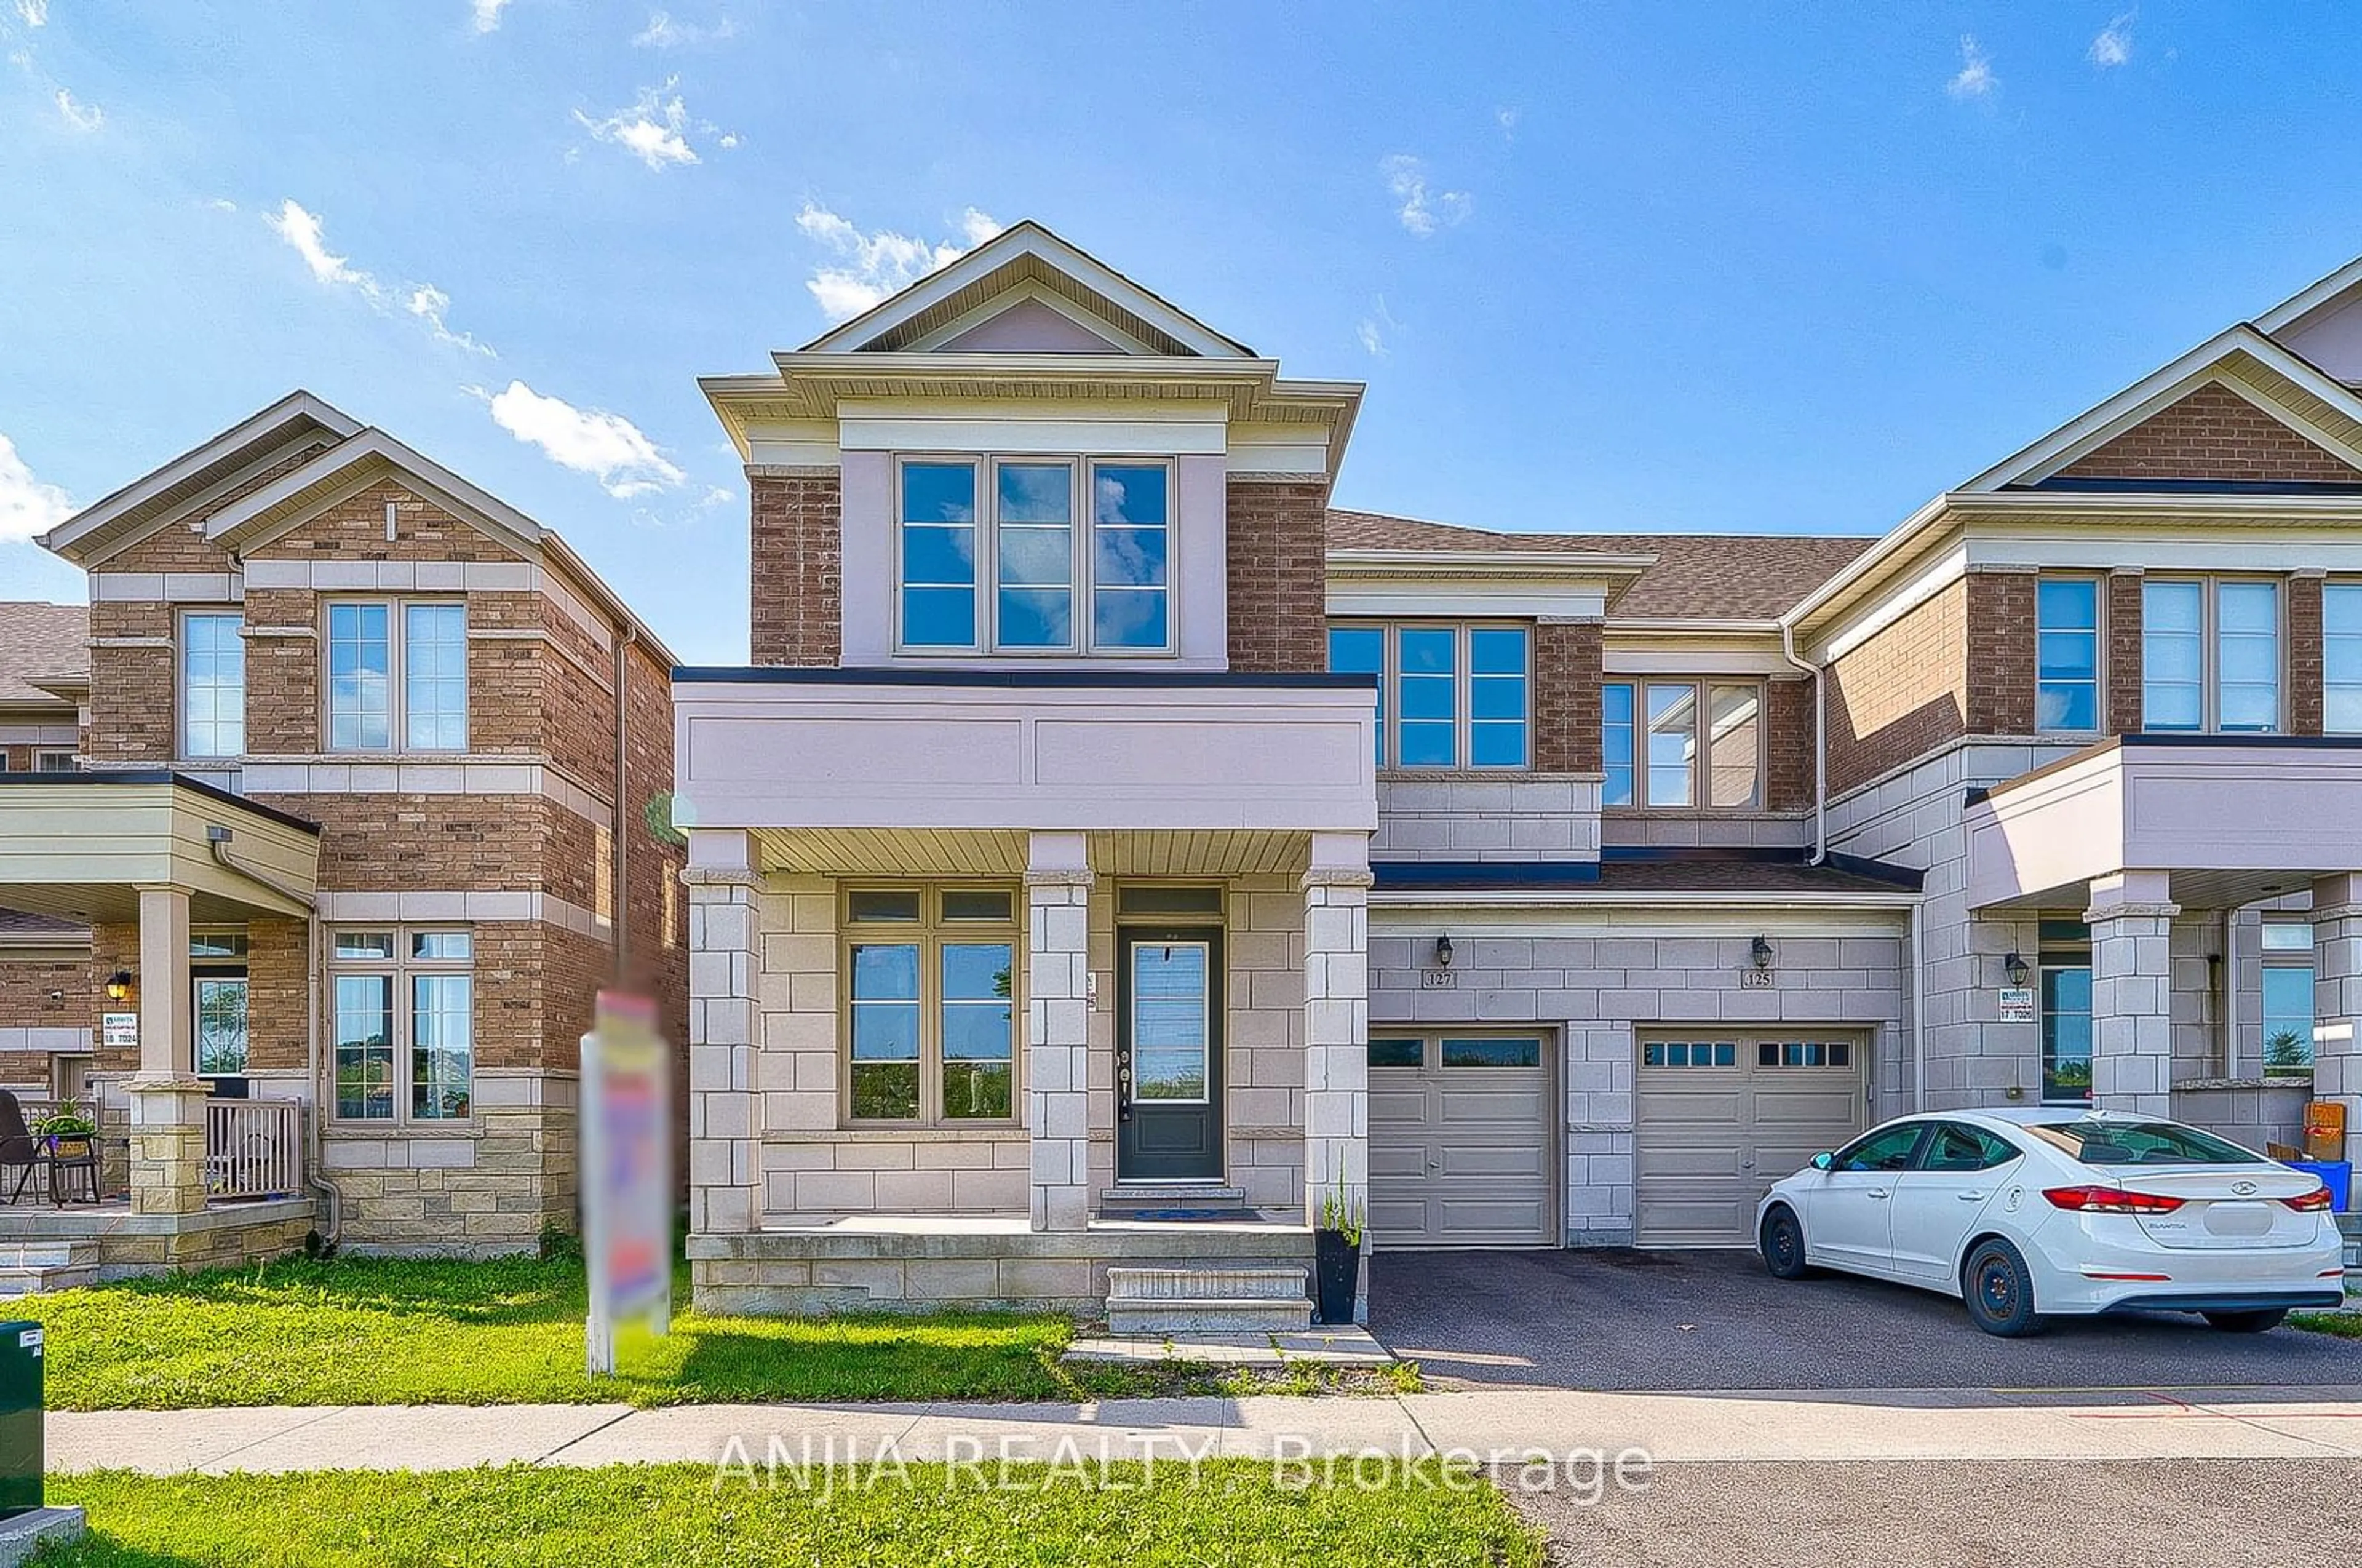 Home with brick exterior material for 127 Decast Cres, Markham Ontario L6B 1N8